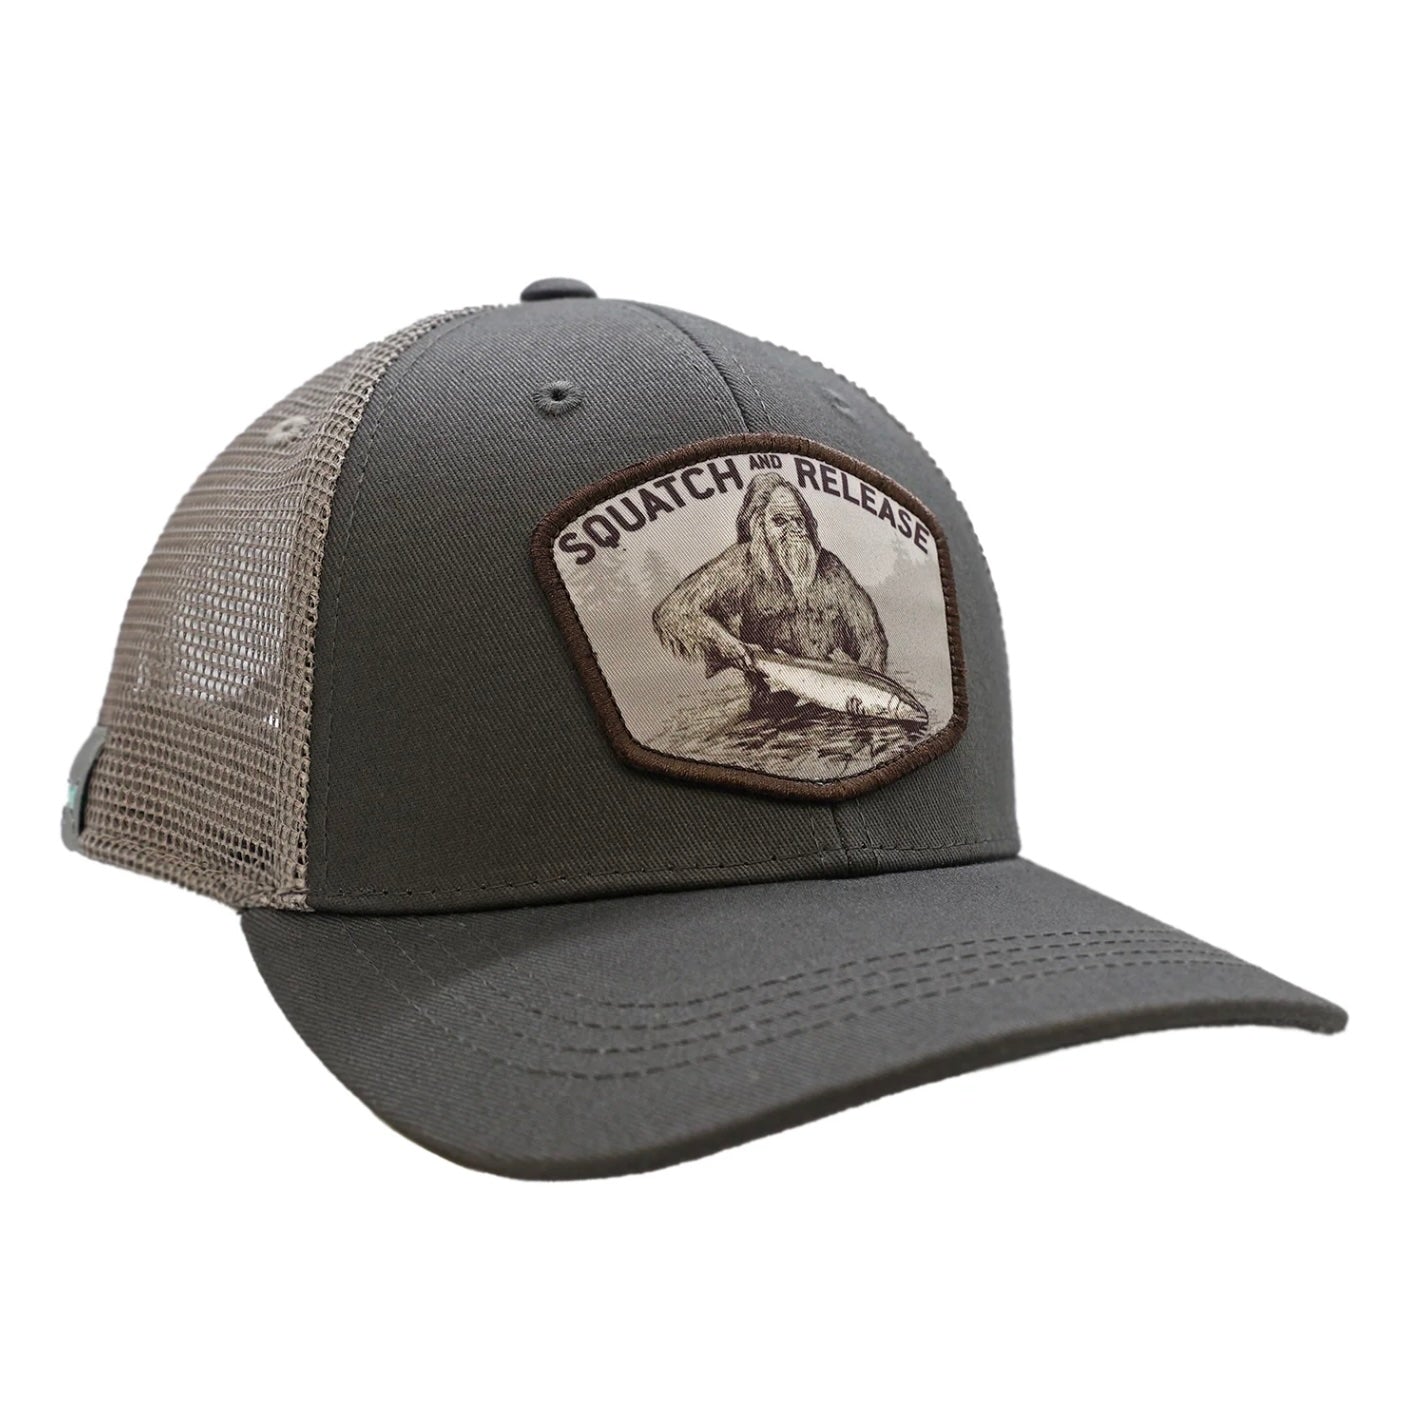 RepYourWater Squatchg and Release Badge Hat